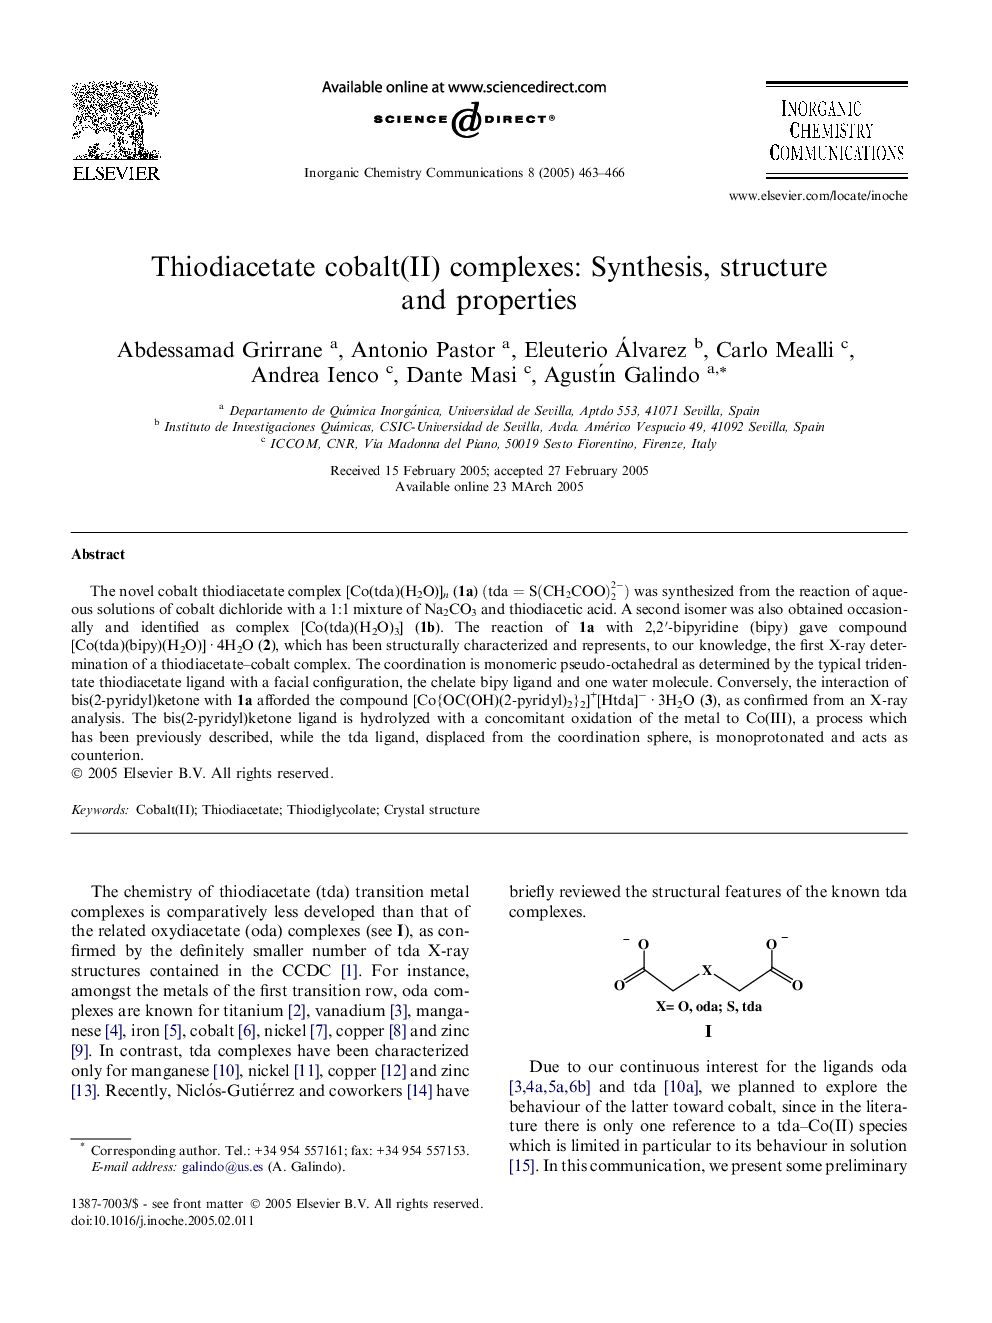 Thiodiacetate cobalt(II) complexes: Synthesis, structure and properties